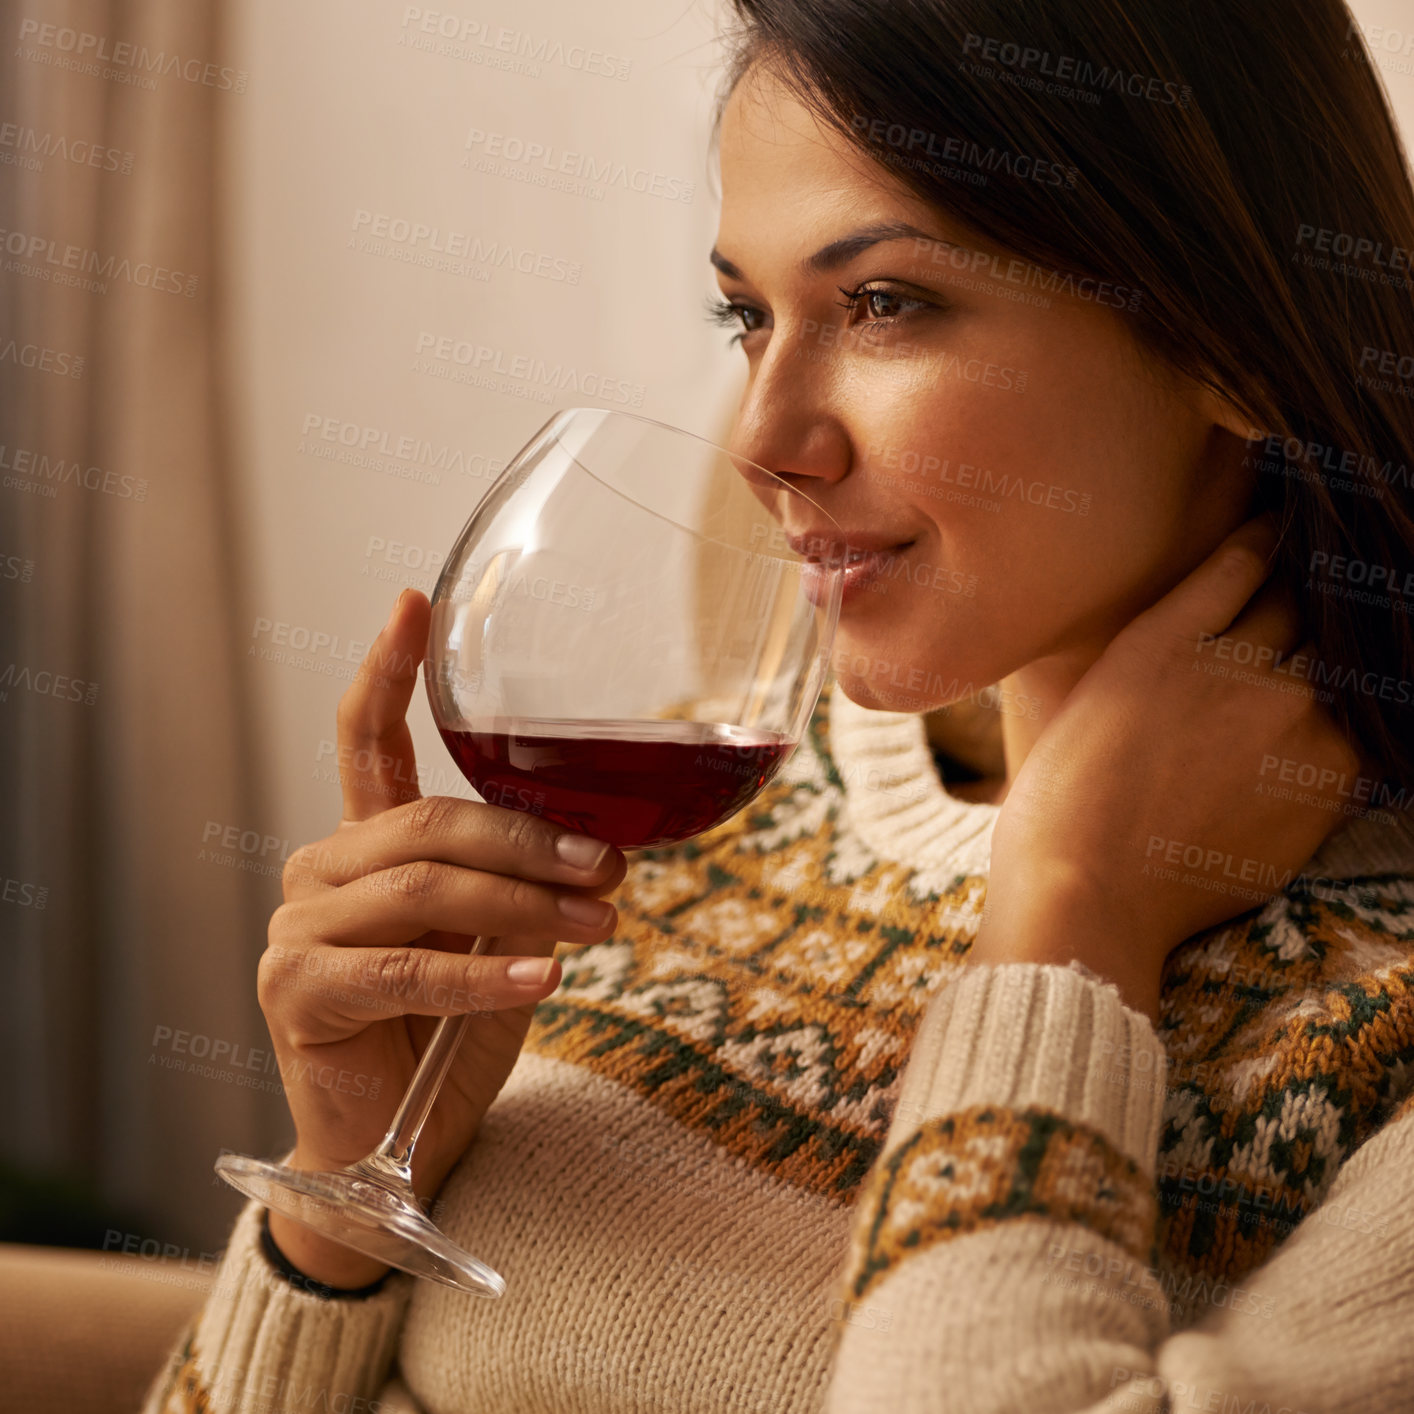 Buy stock photo Cropped shot of an attractive young woman enjoying a glass of wine while relaxing at home